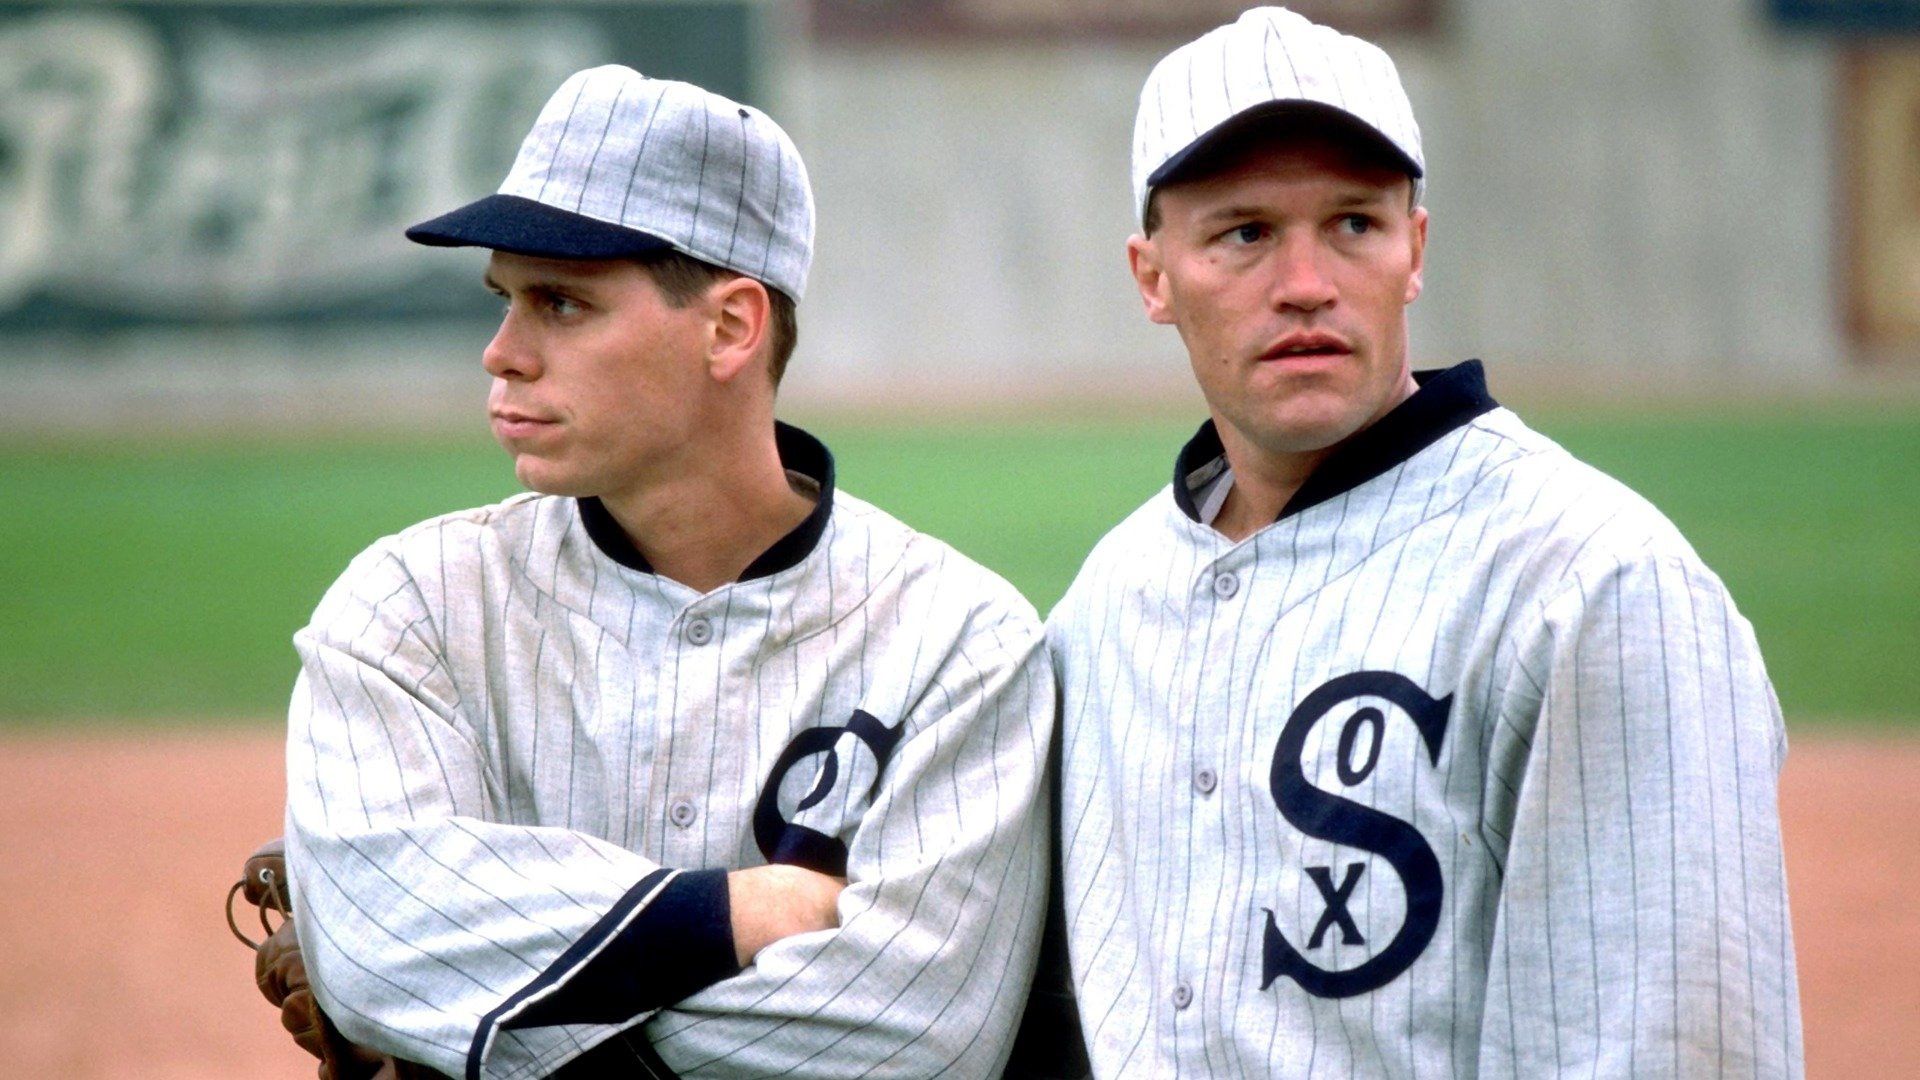 Eight Men Out Backdrop